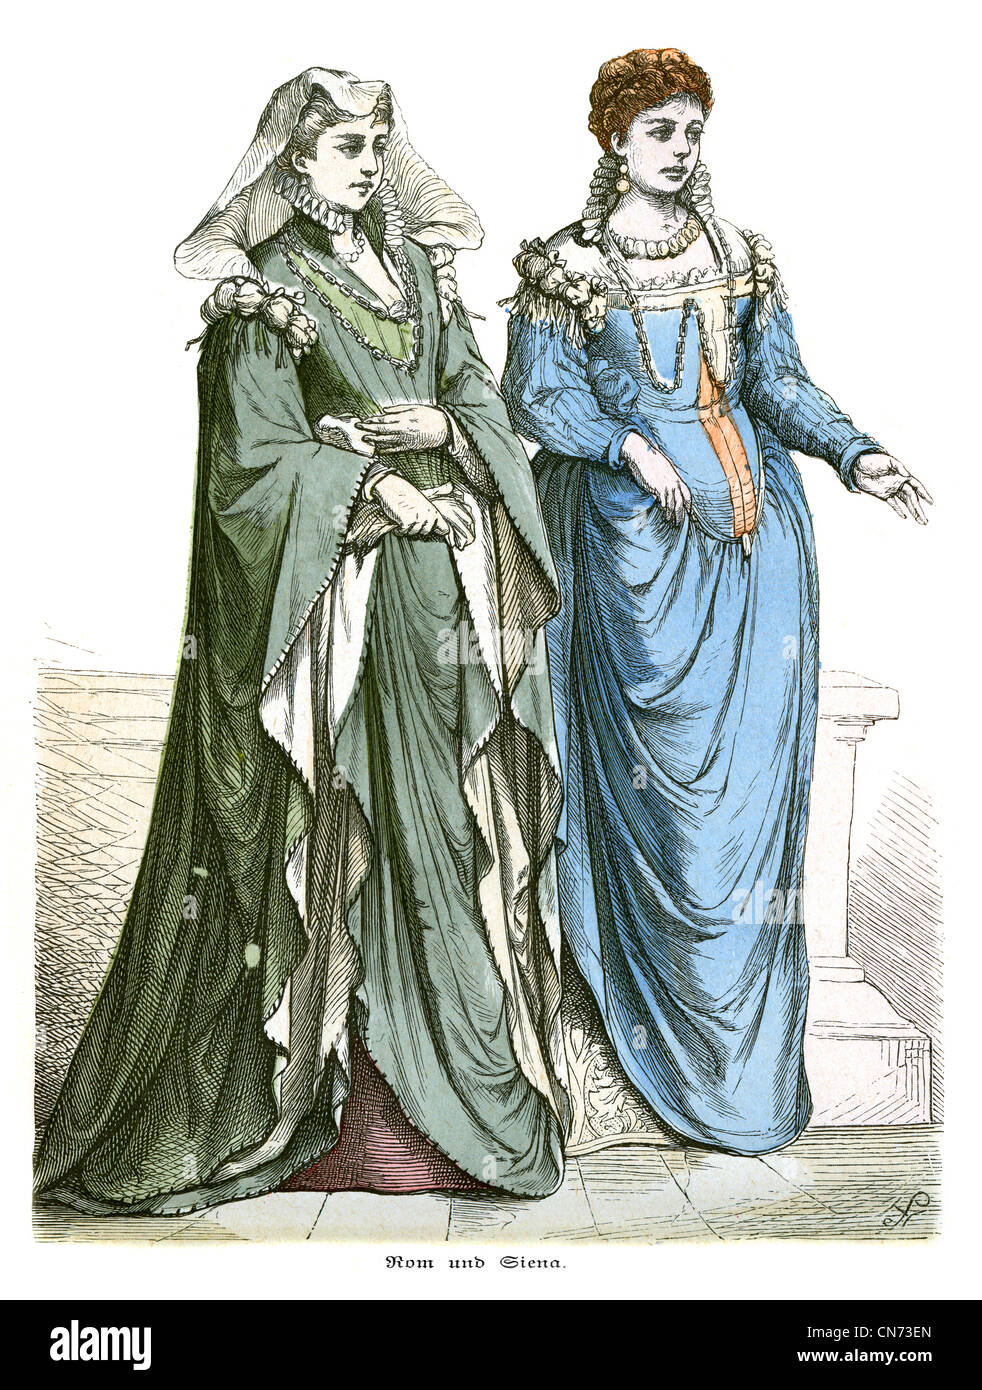 two women in the fashion of 18th Century Rome and Siena Stock Photo